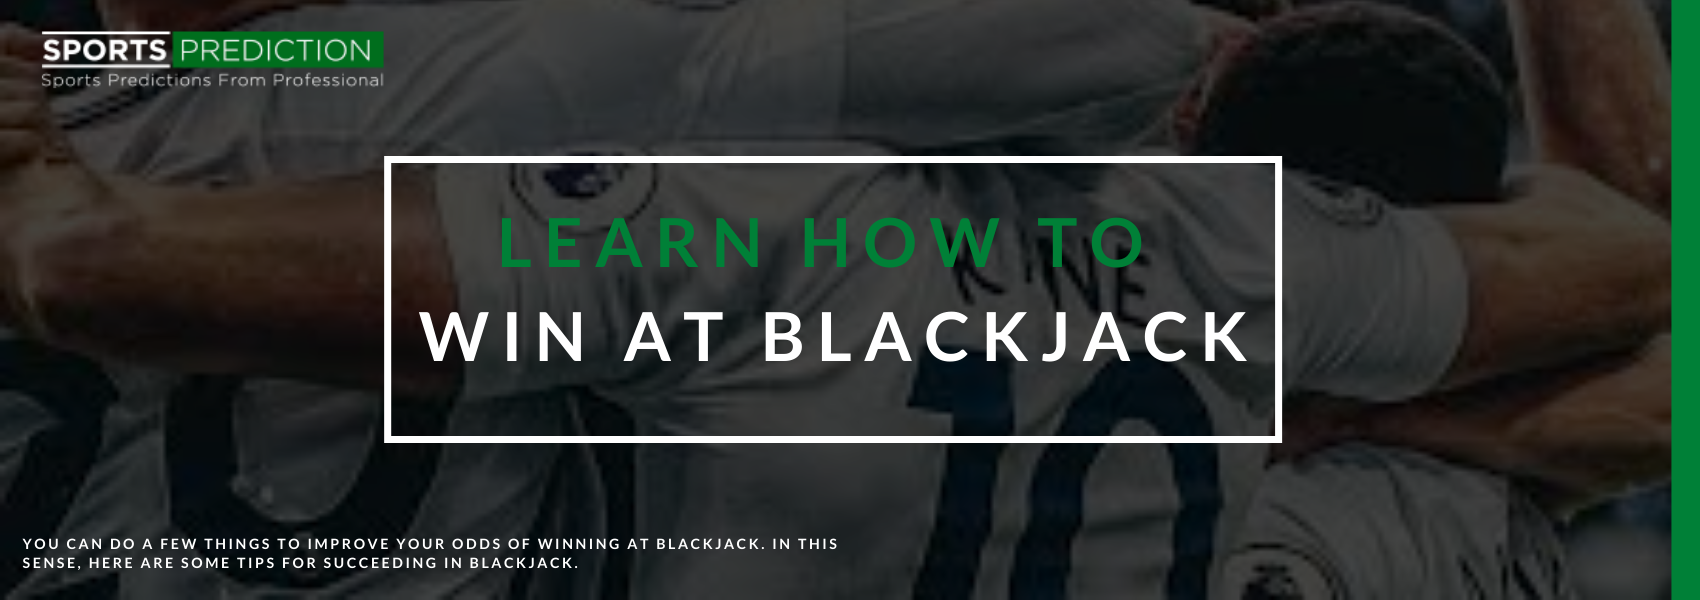 Learn How To Win At Blackjack